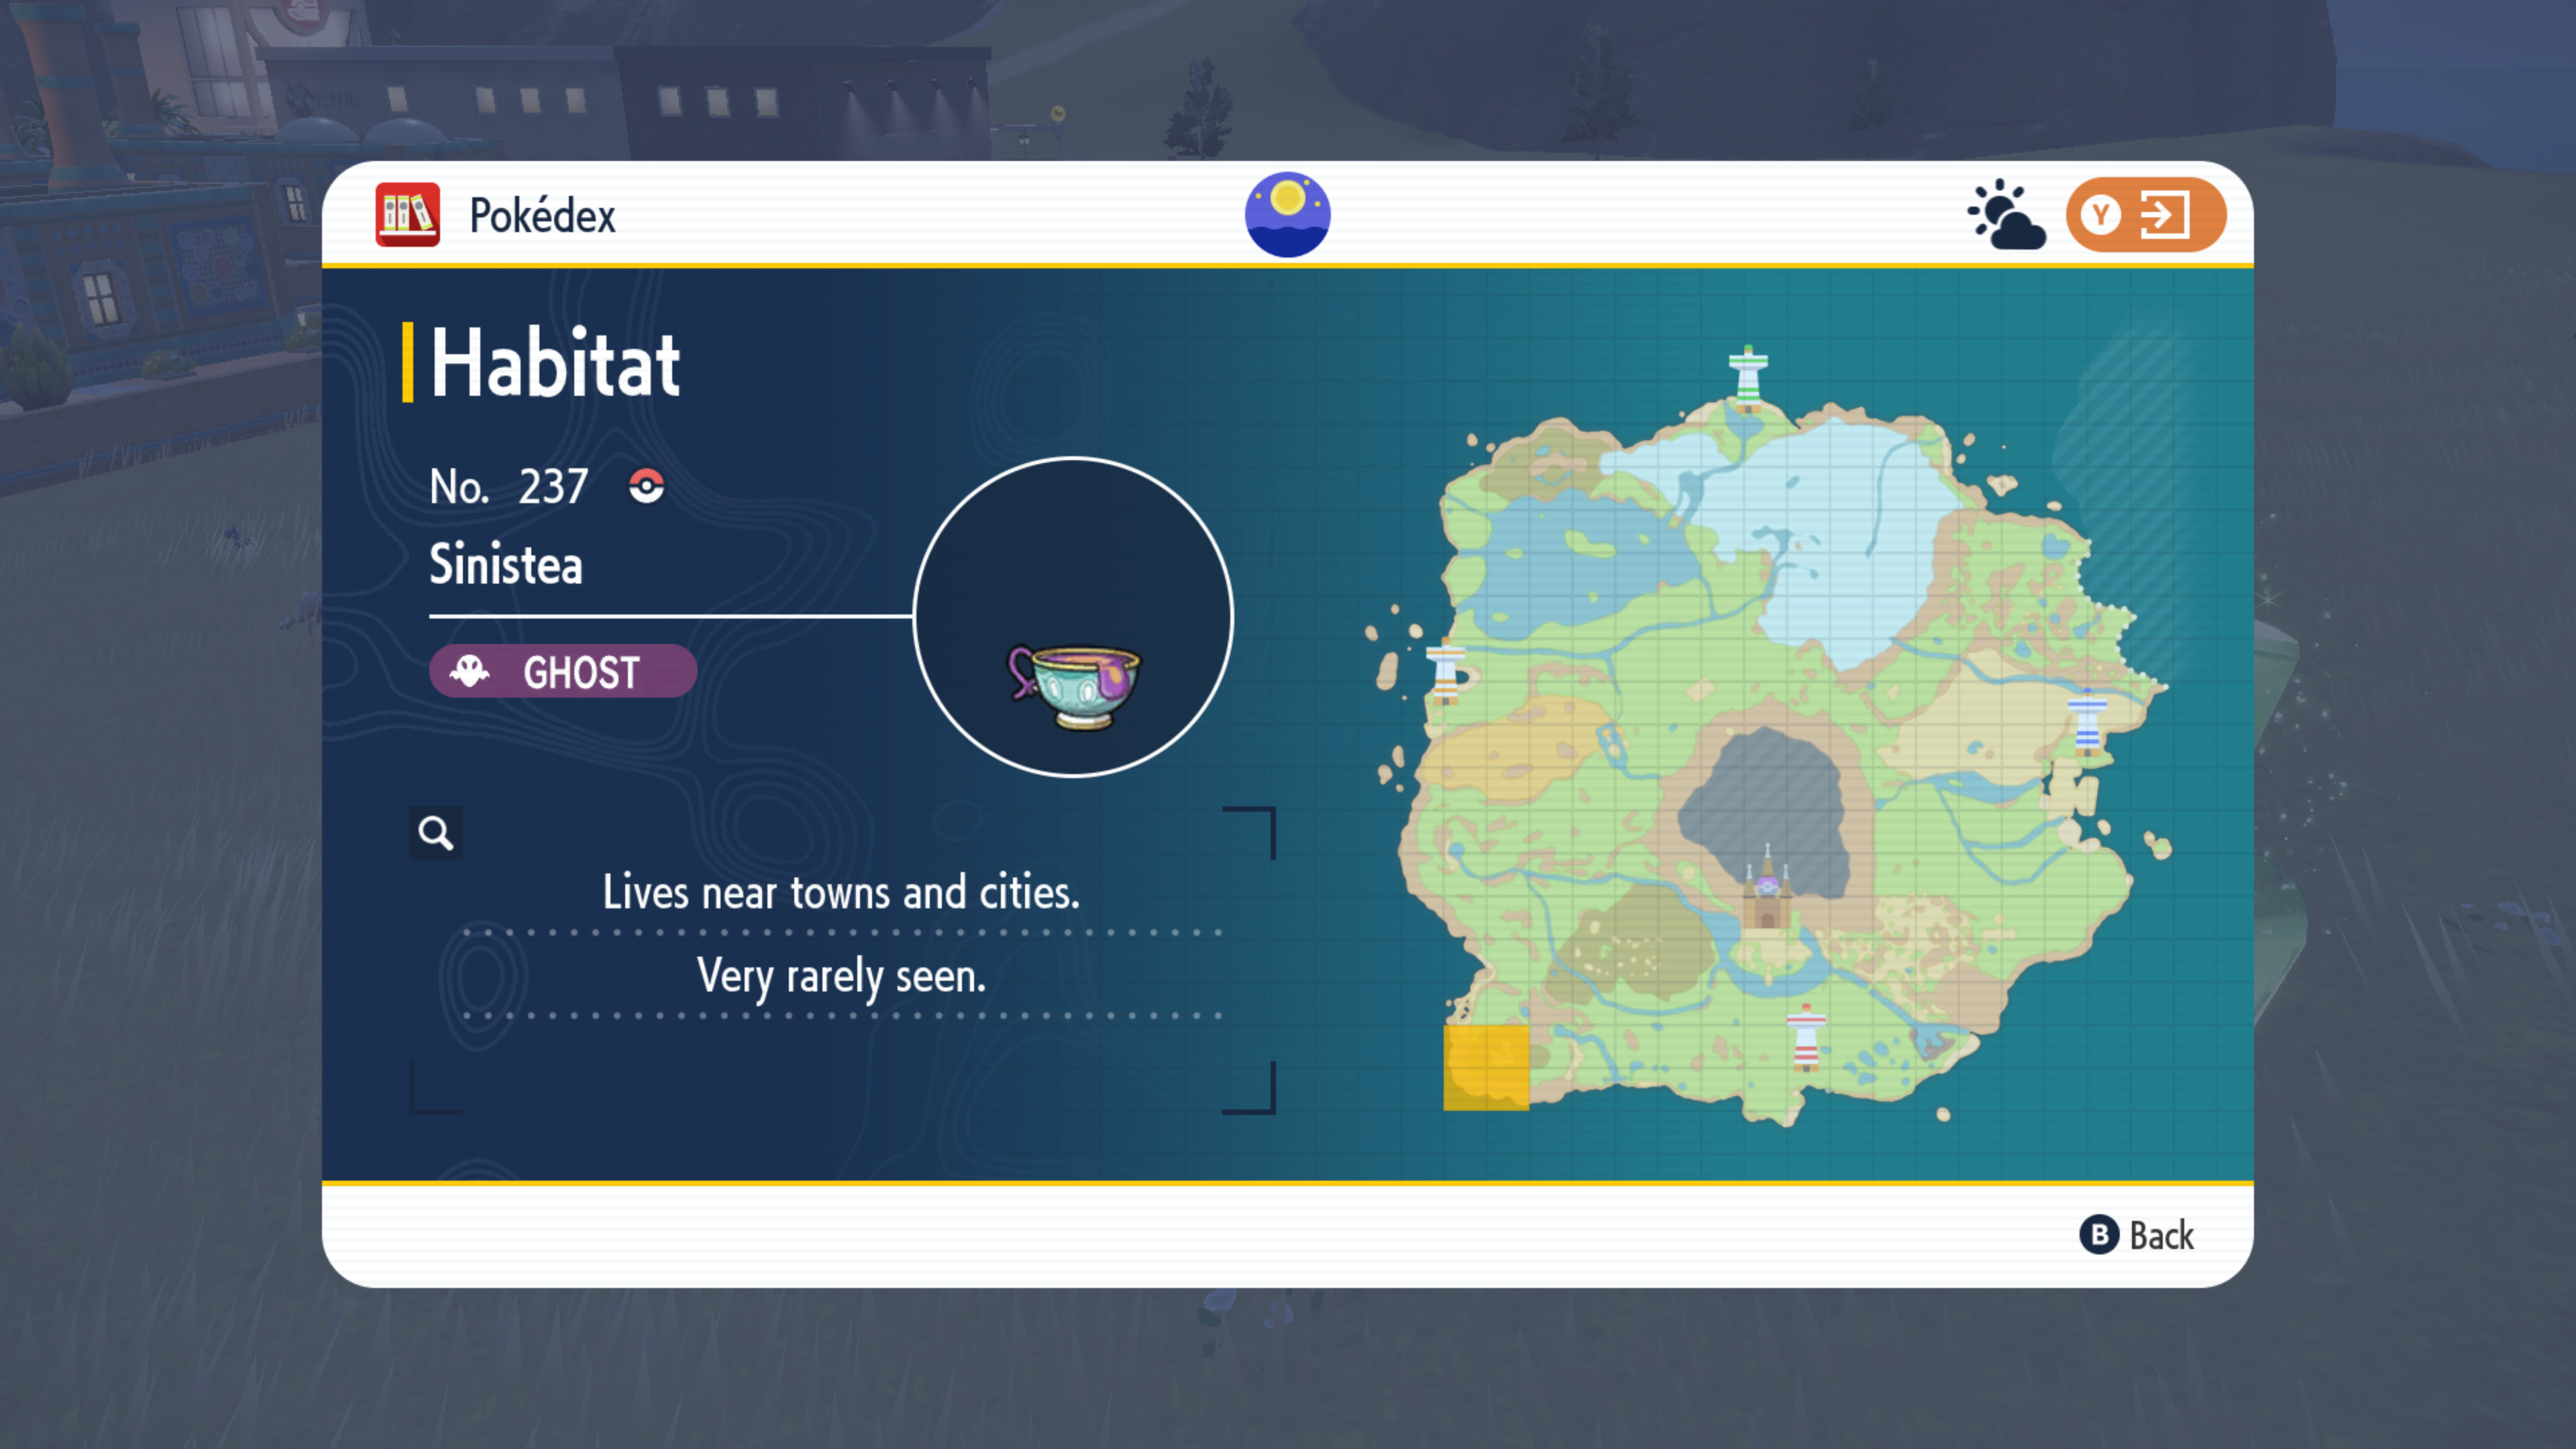 Sinistea will spawn close to towns and cities